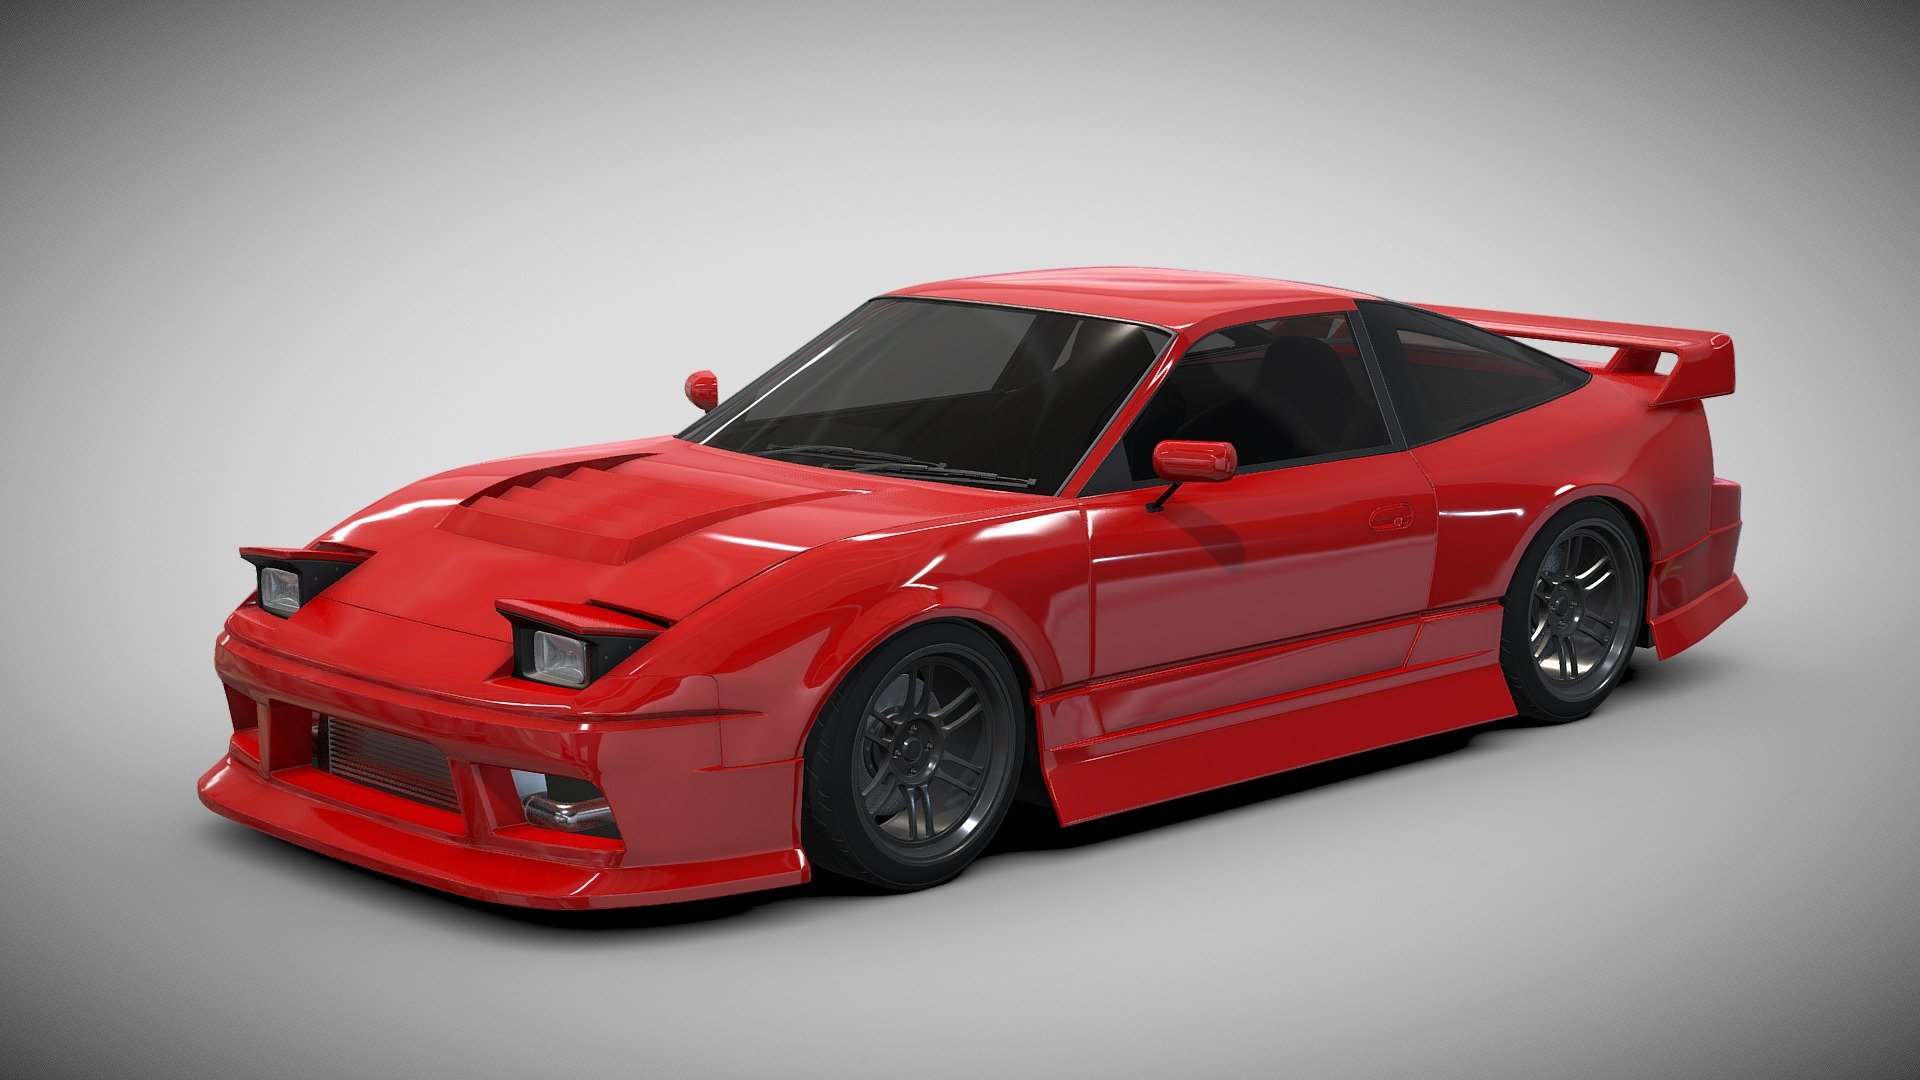 A 3D model of the Nissan 180SX that I made, then I modified it in several parts.

Pop-up lamp available. So you can open and close the headlights as you wish.

The interior of the car is not detailed, because I only focus on the exterior 3d model